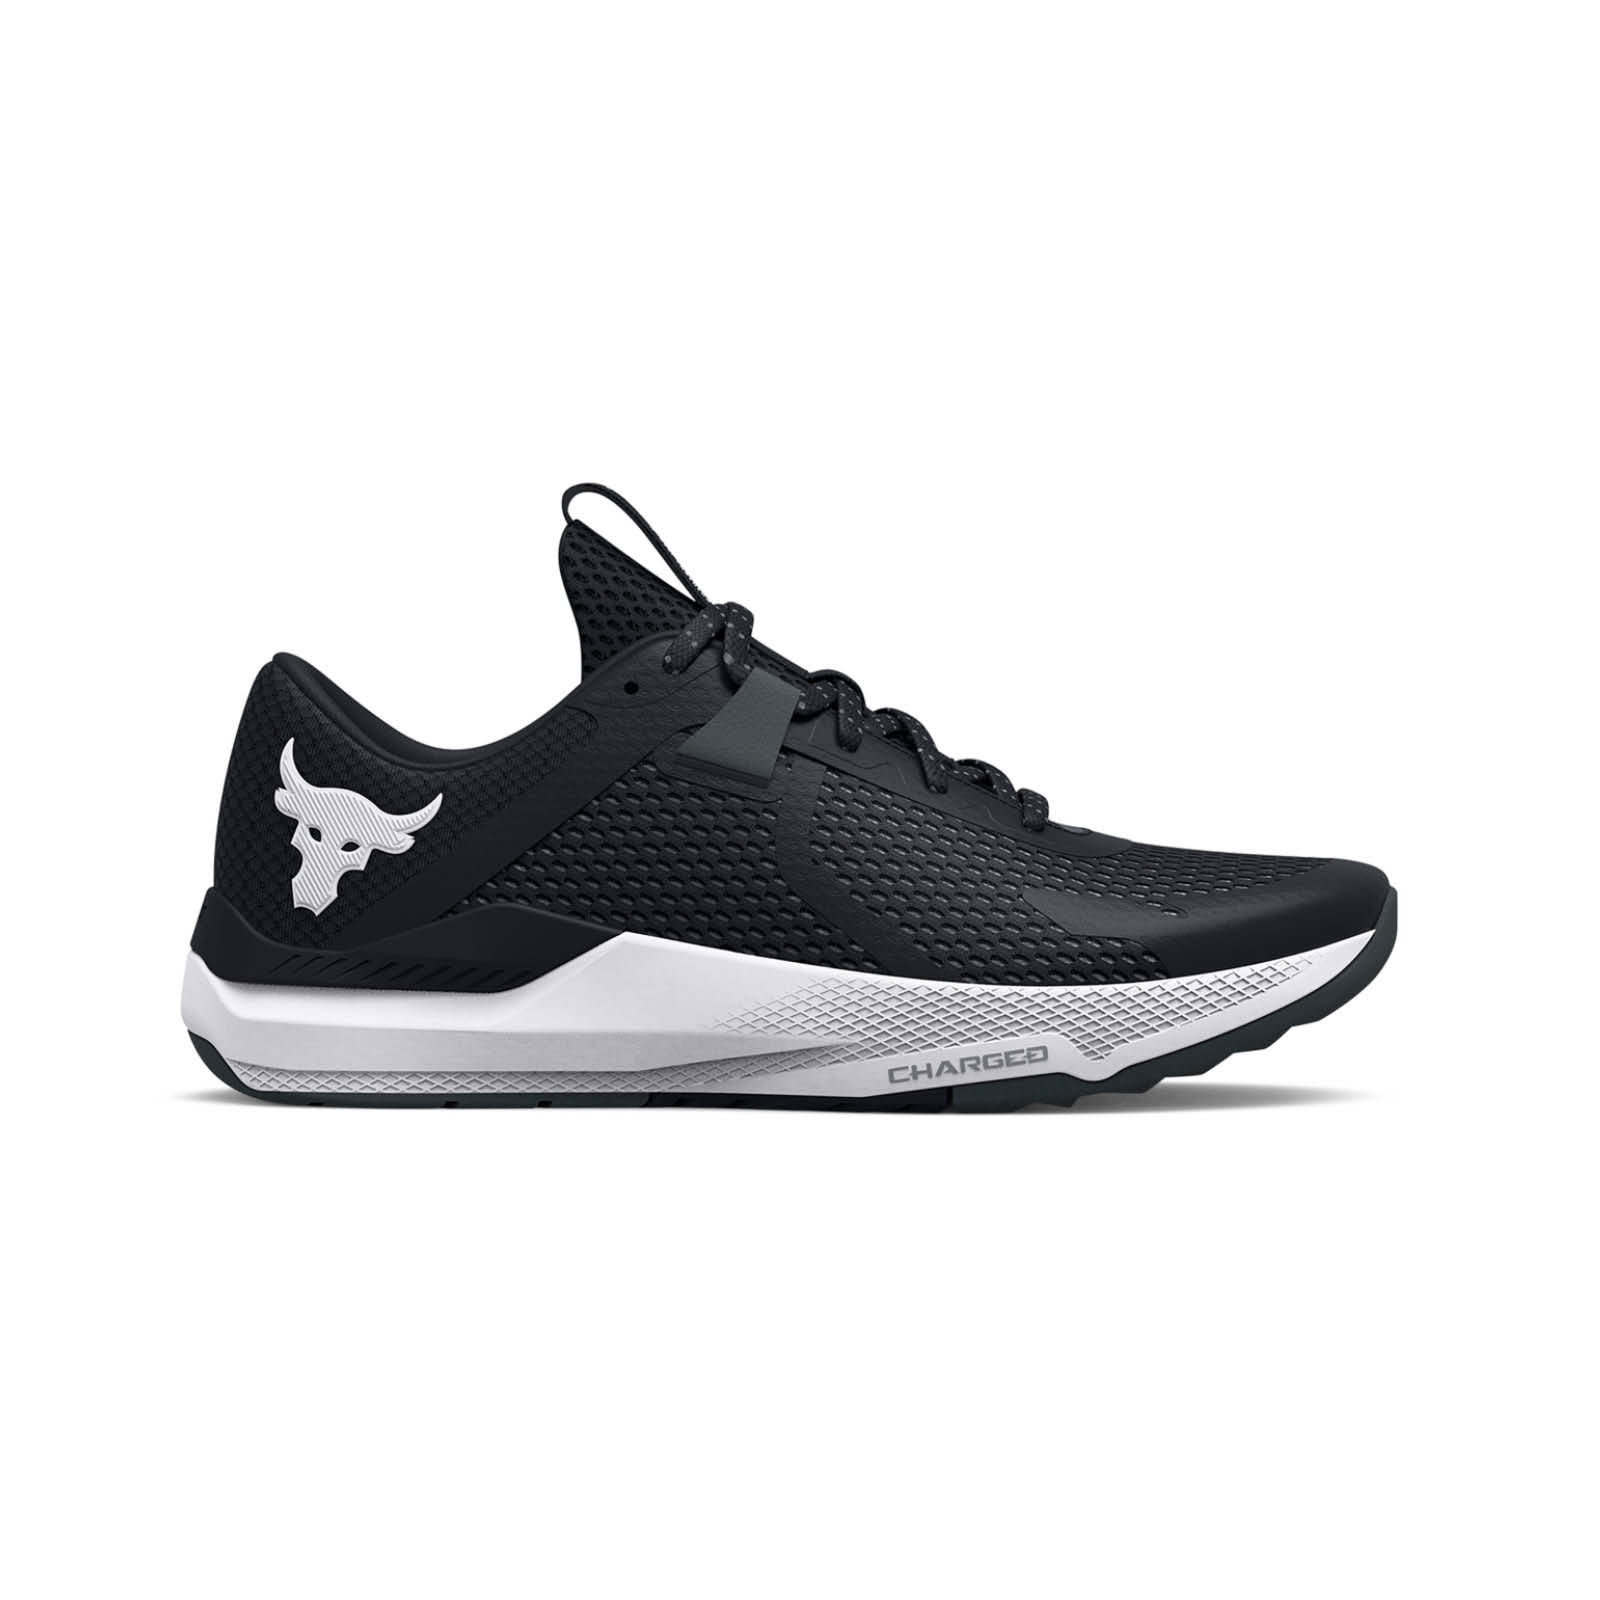 Under Armour - 3025081 PROJECT ROCK BSR 2 - 001/7393 Ανδρικά > Παπούτσια > Αθλητικά > Παπούτσι Low Cut